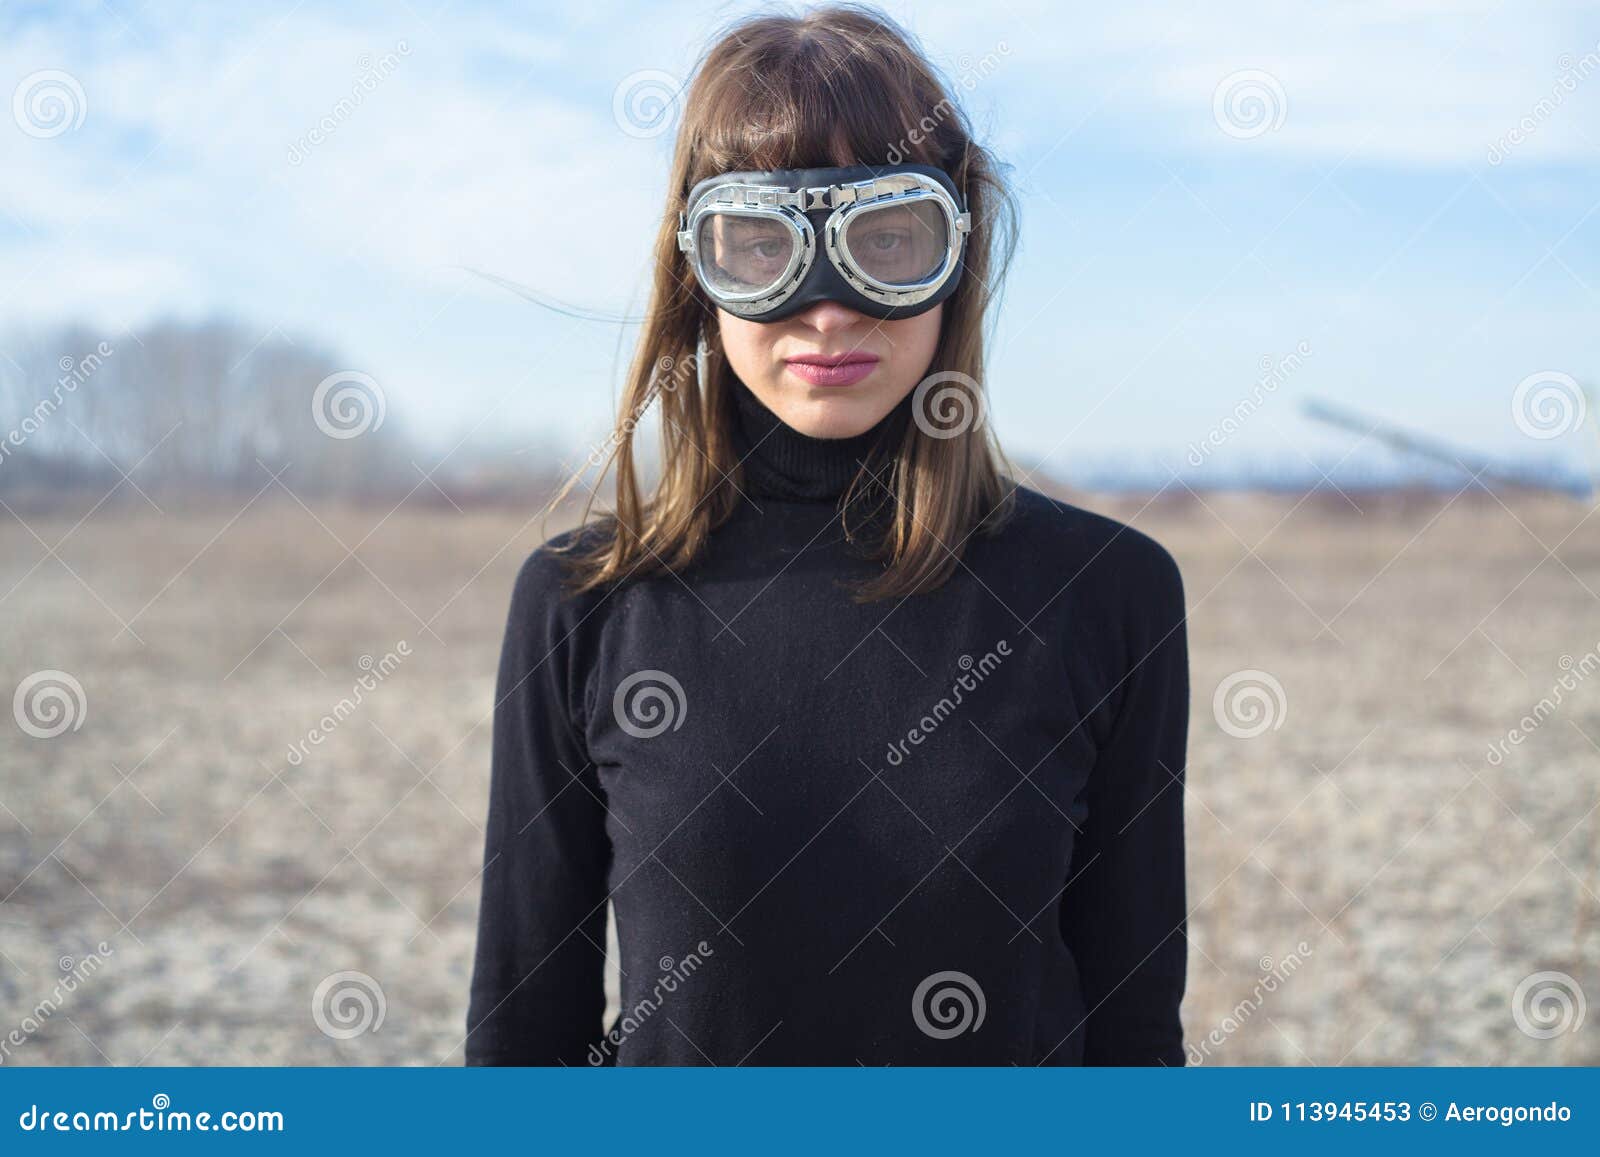 Young Woman with Sand Goggles Standing Alone Stock Image - Image ...